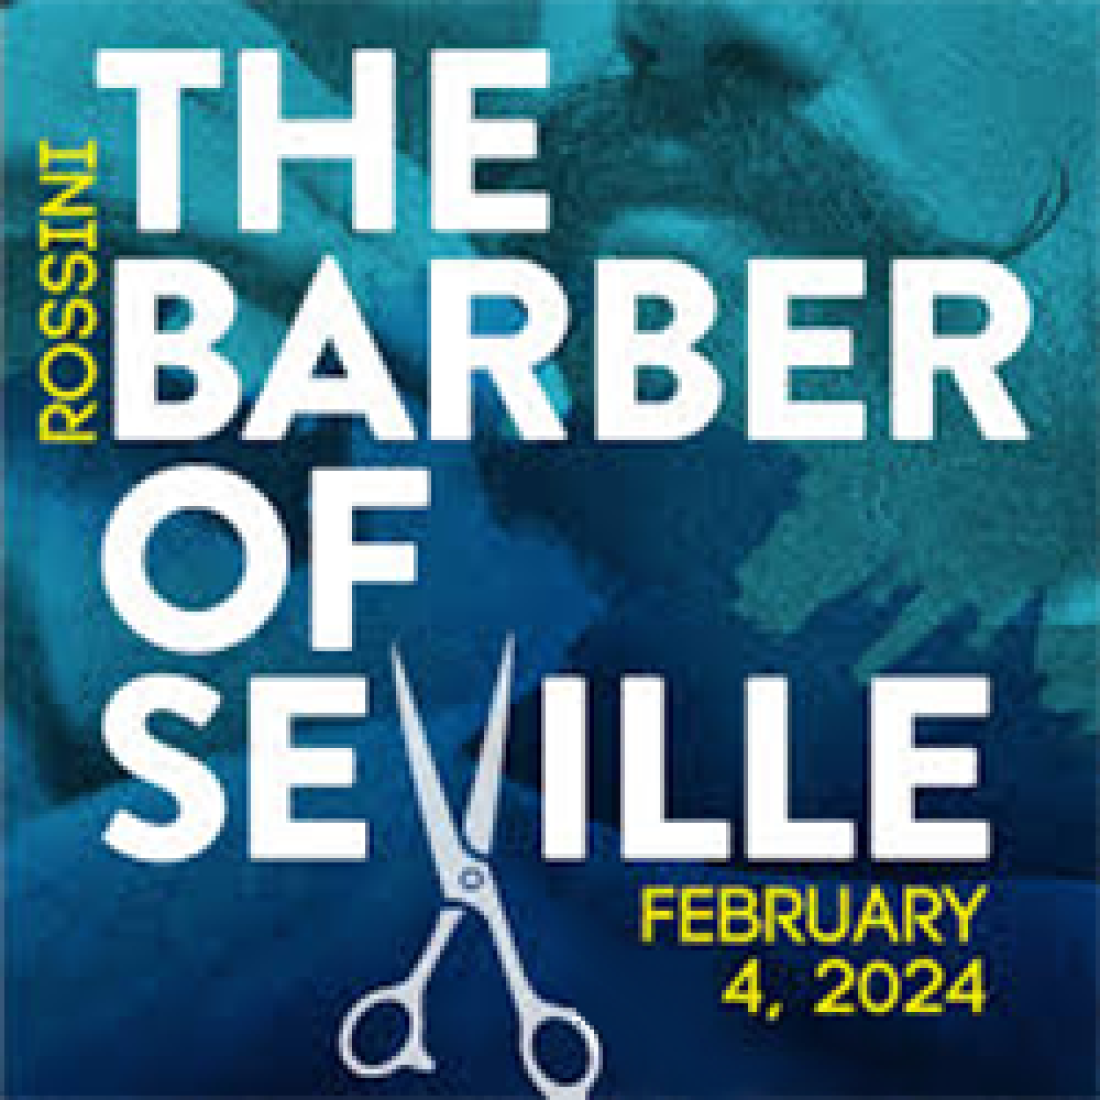 Musical advertisement for The Barber of Seville